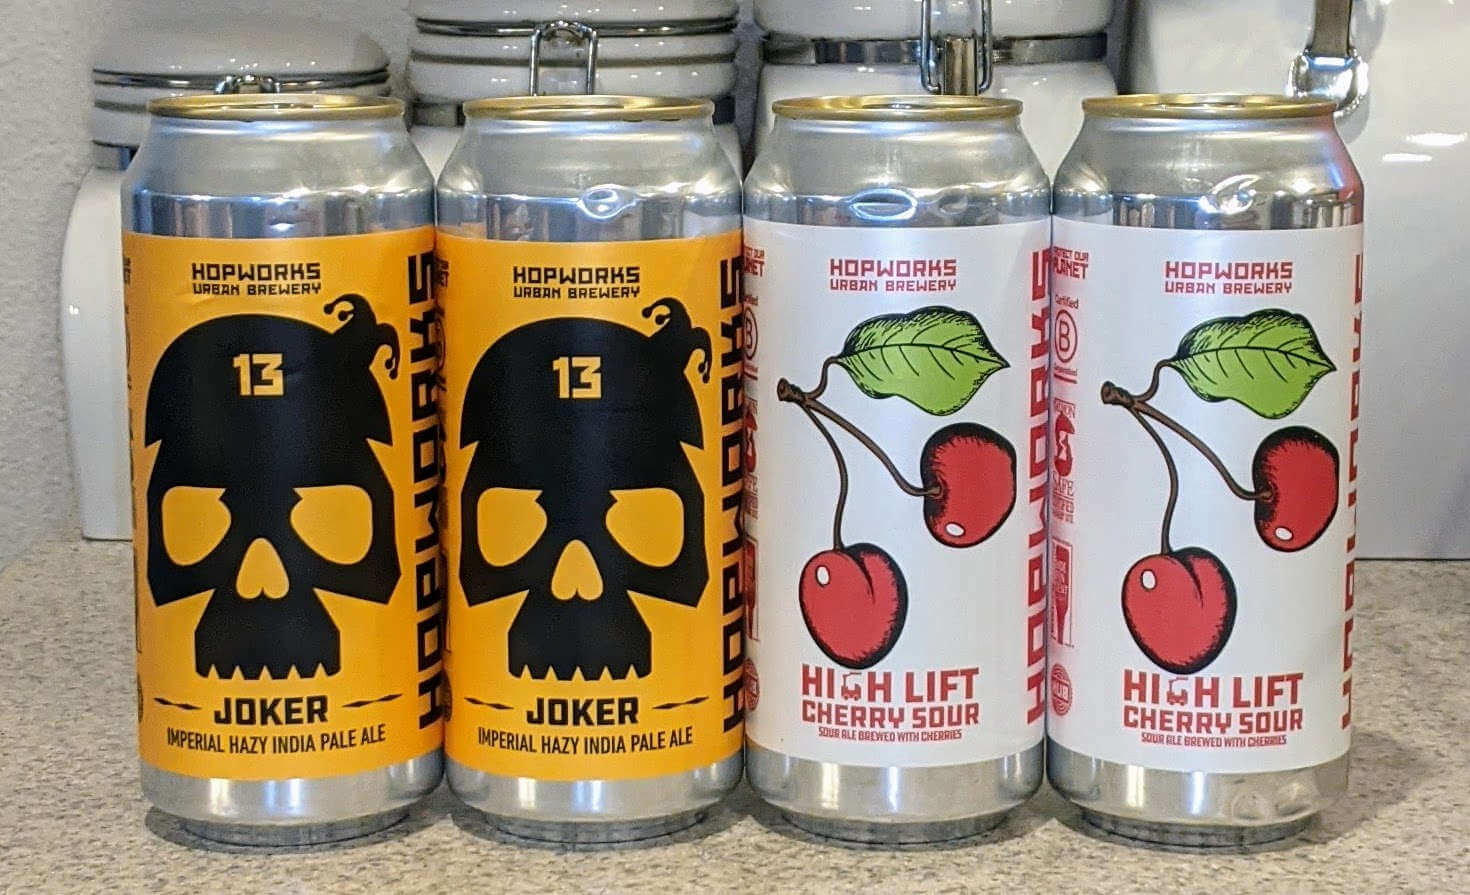 Hopworks Urban Brewery: Joker Imperial Hazy IPA and High Lift Cherry Sour